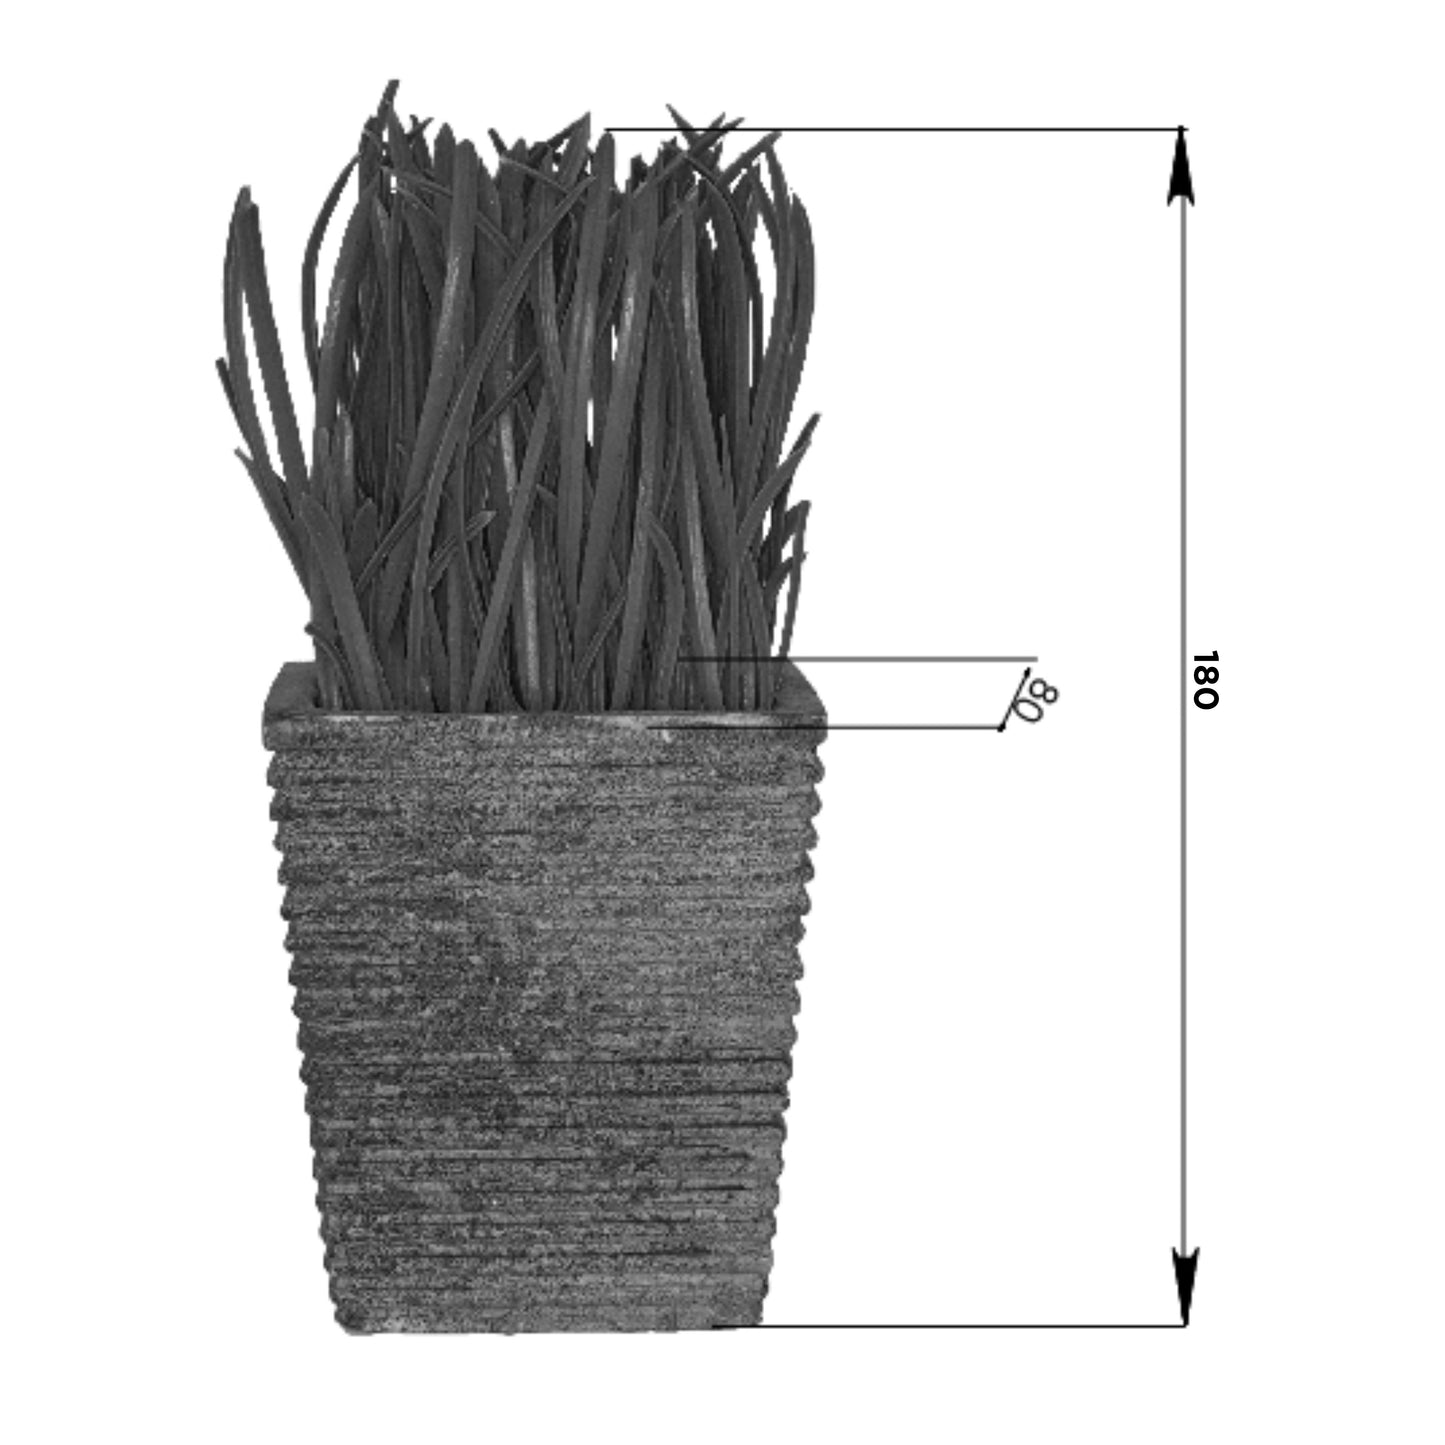 Criterion Artificial Potted Grass Plant (small) 160mm